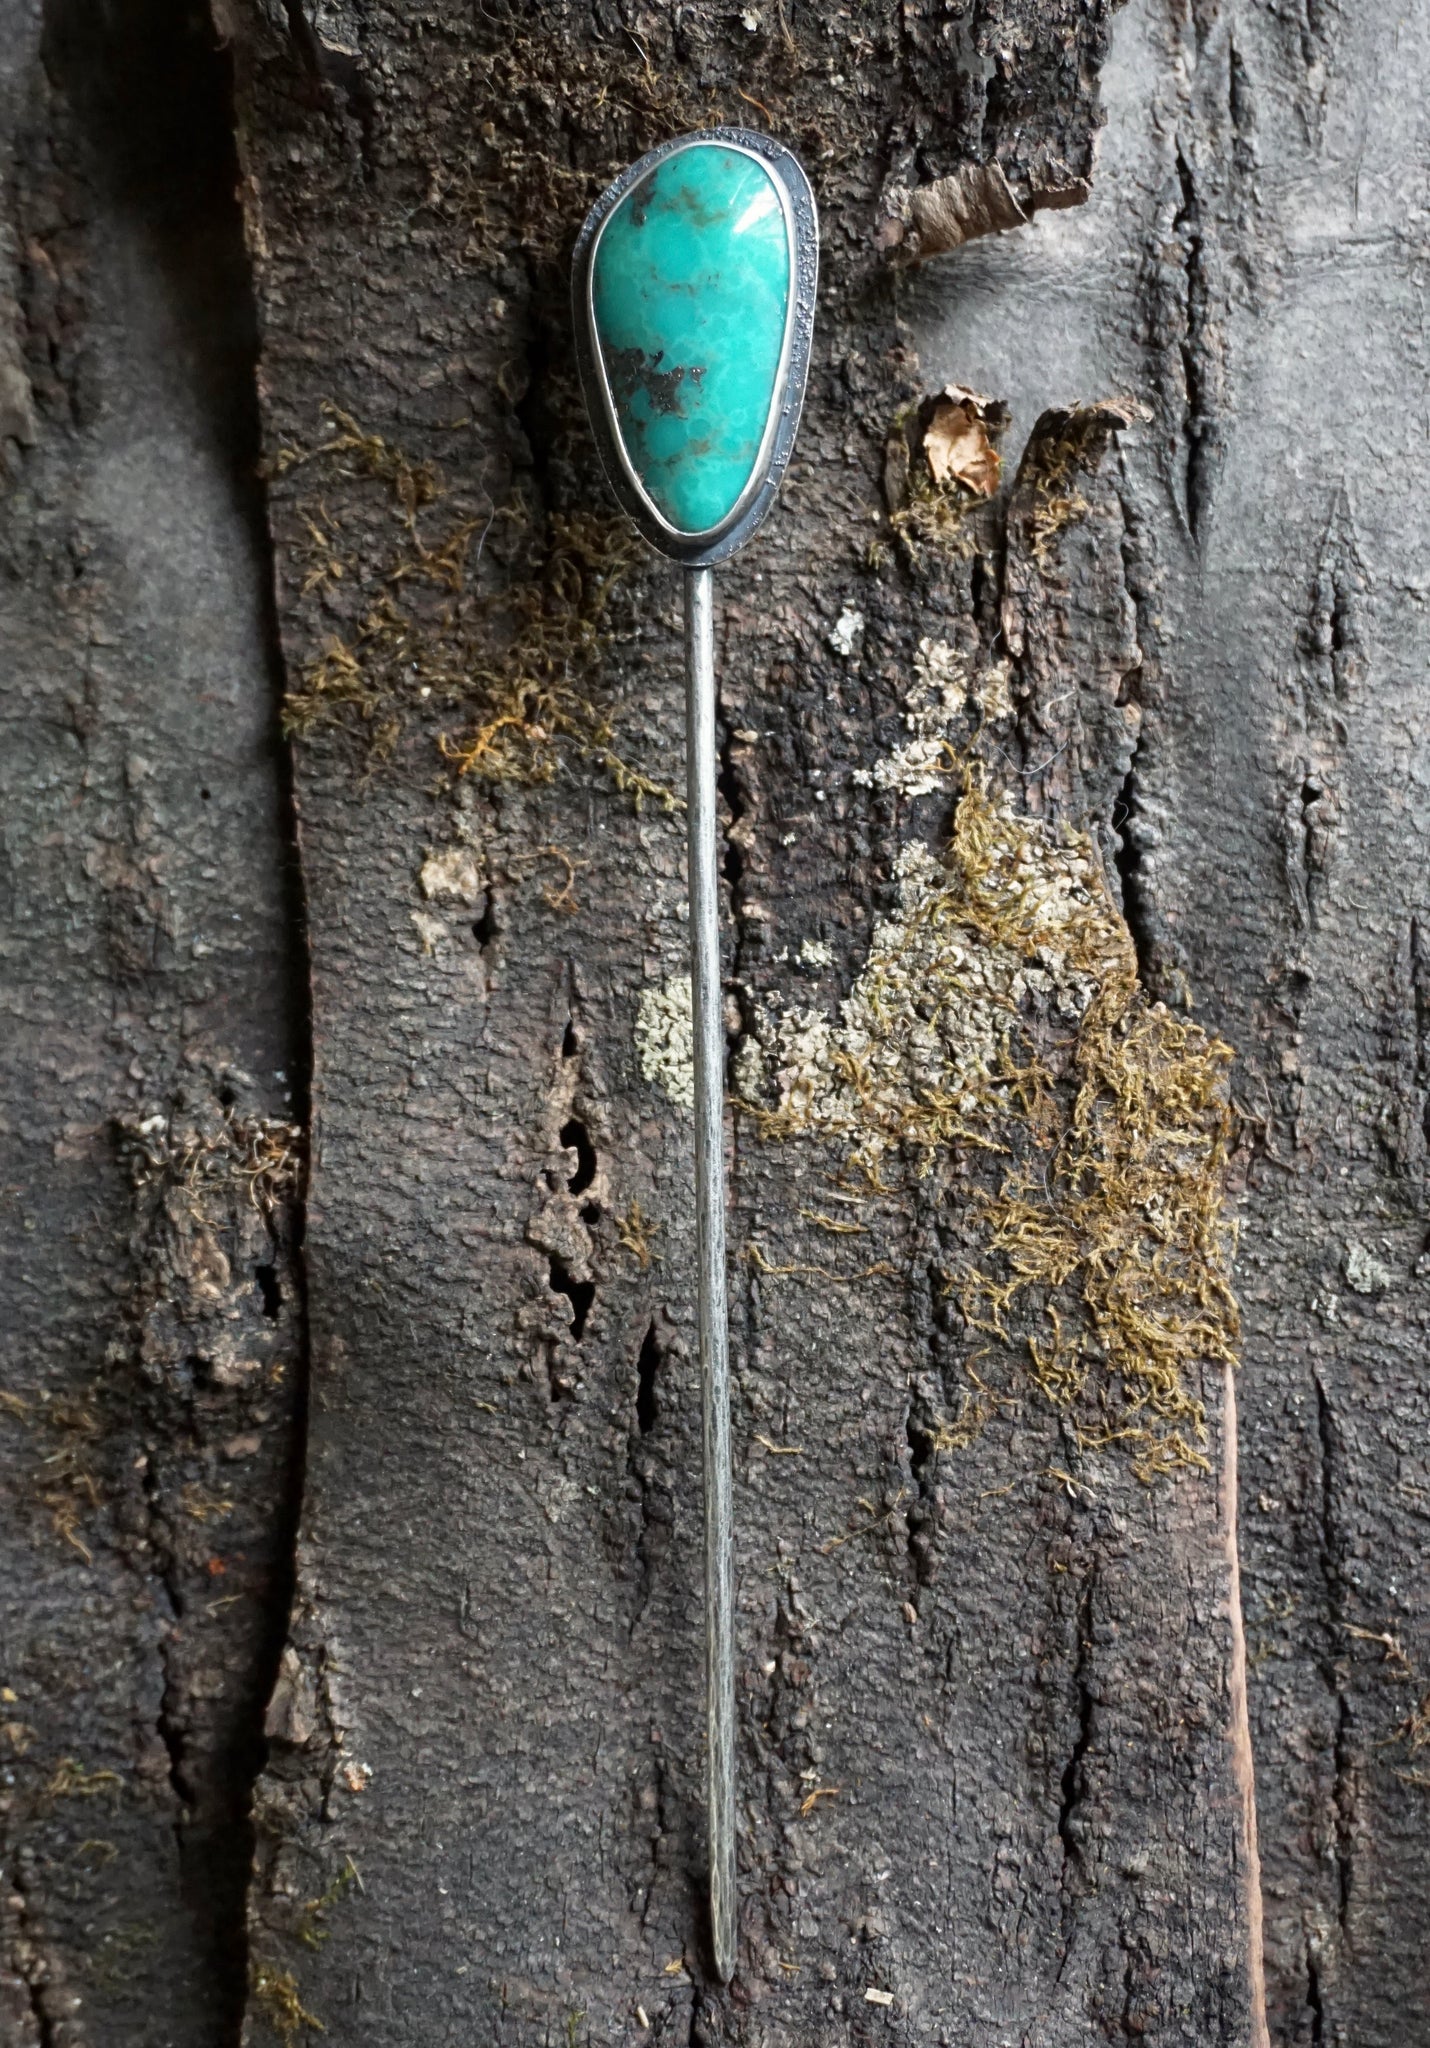 Large Campitos Turquoise Hair Gem Pin in Handcrafted Sterling